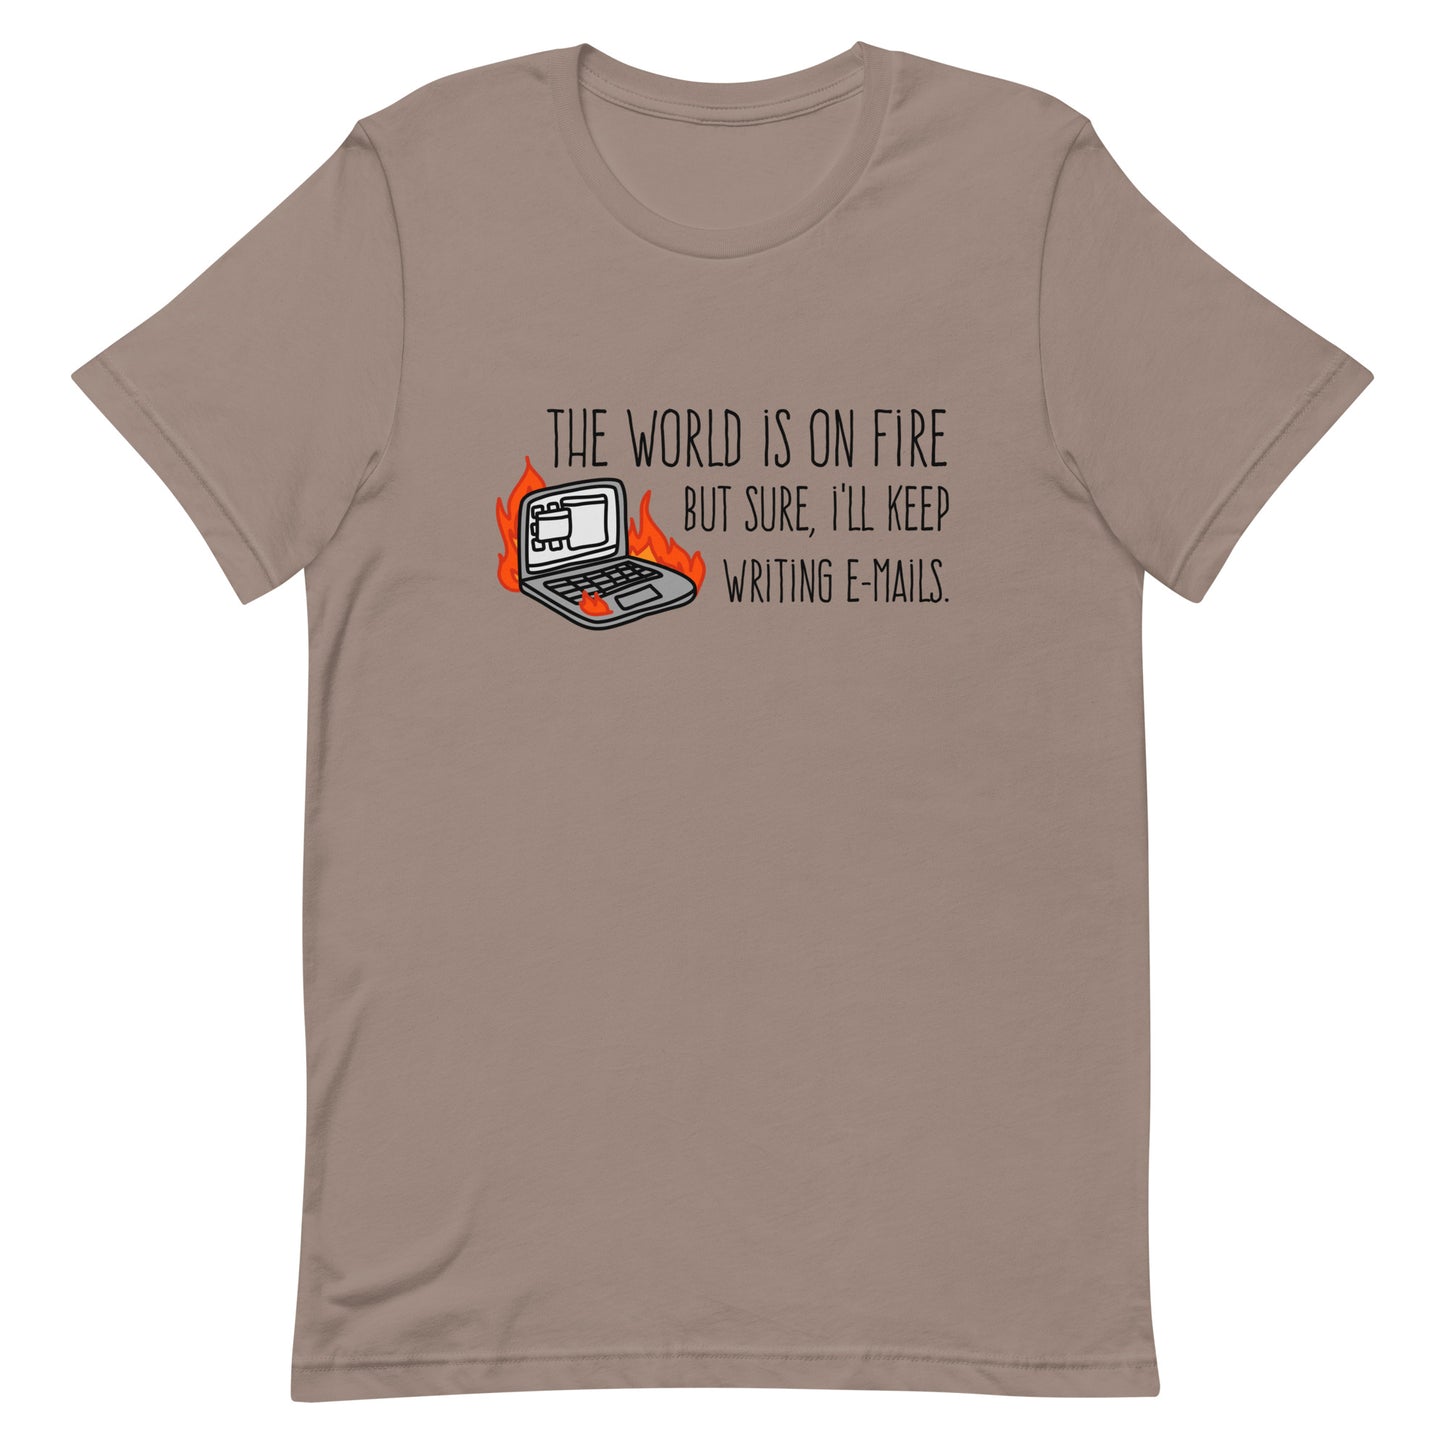 A light brown crewneck t-shirt featuring a squiggly illustration of a laptop that is on fire. Text alongside the laptop reads "the world is on fire but sure, I'll keep writing e-mails."